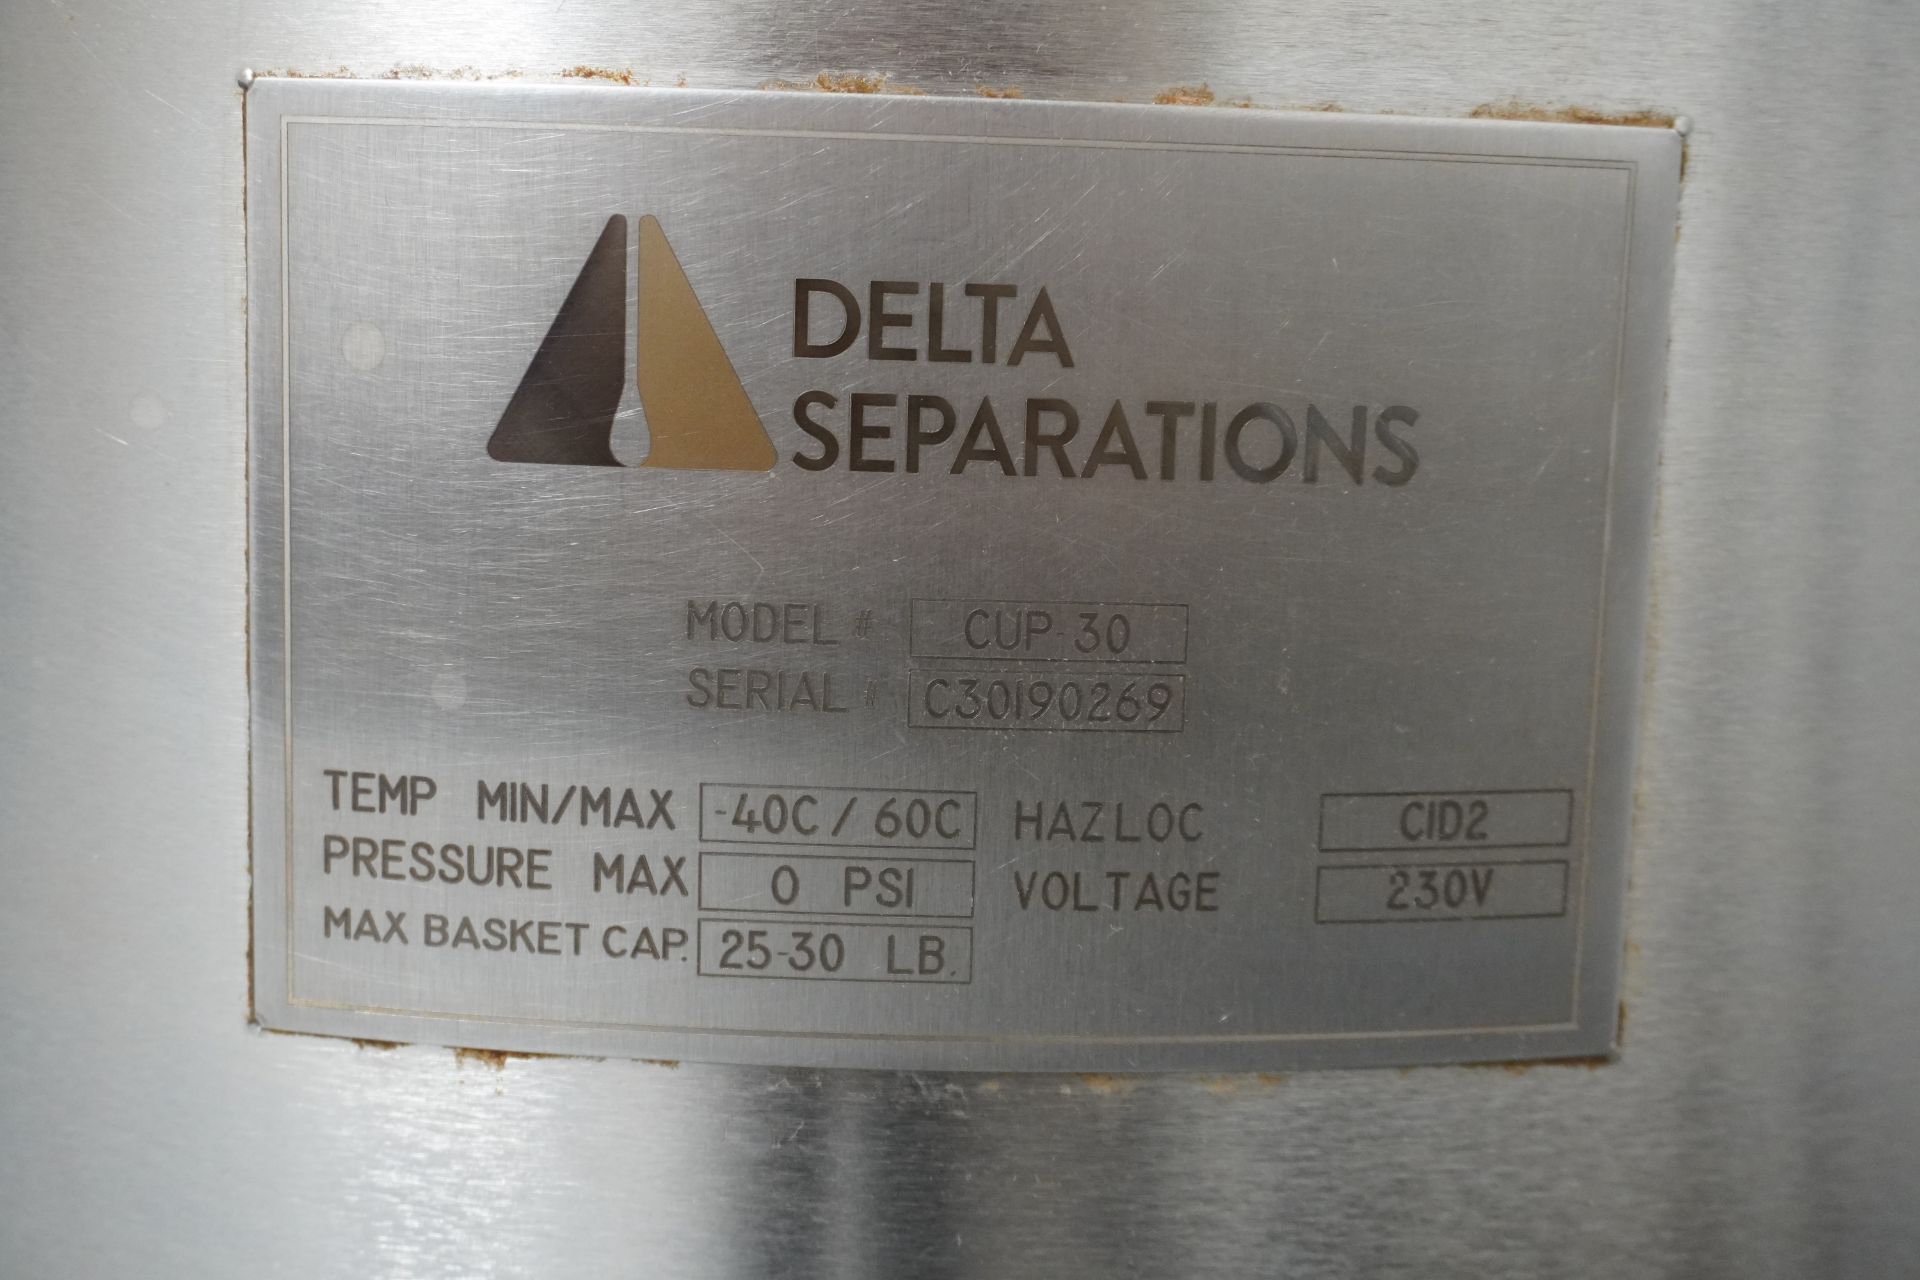 Used- Used Delta Separations CUP 30 Extraction System. Model CUP 30 V 2.0 - Image 2 of 6